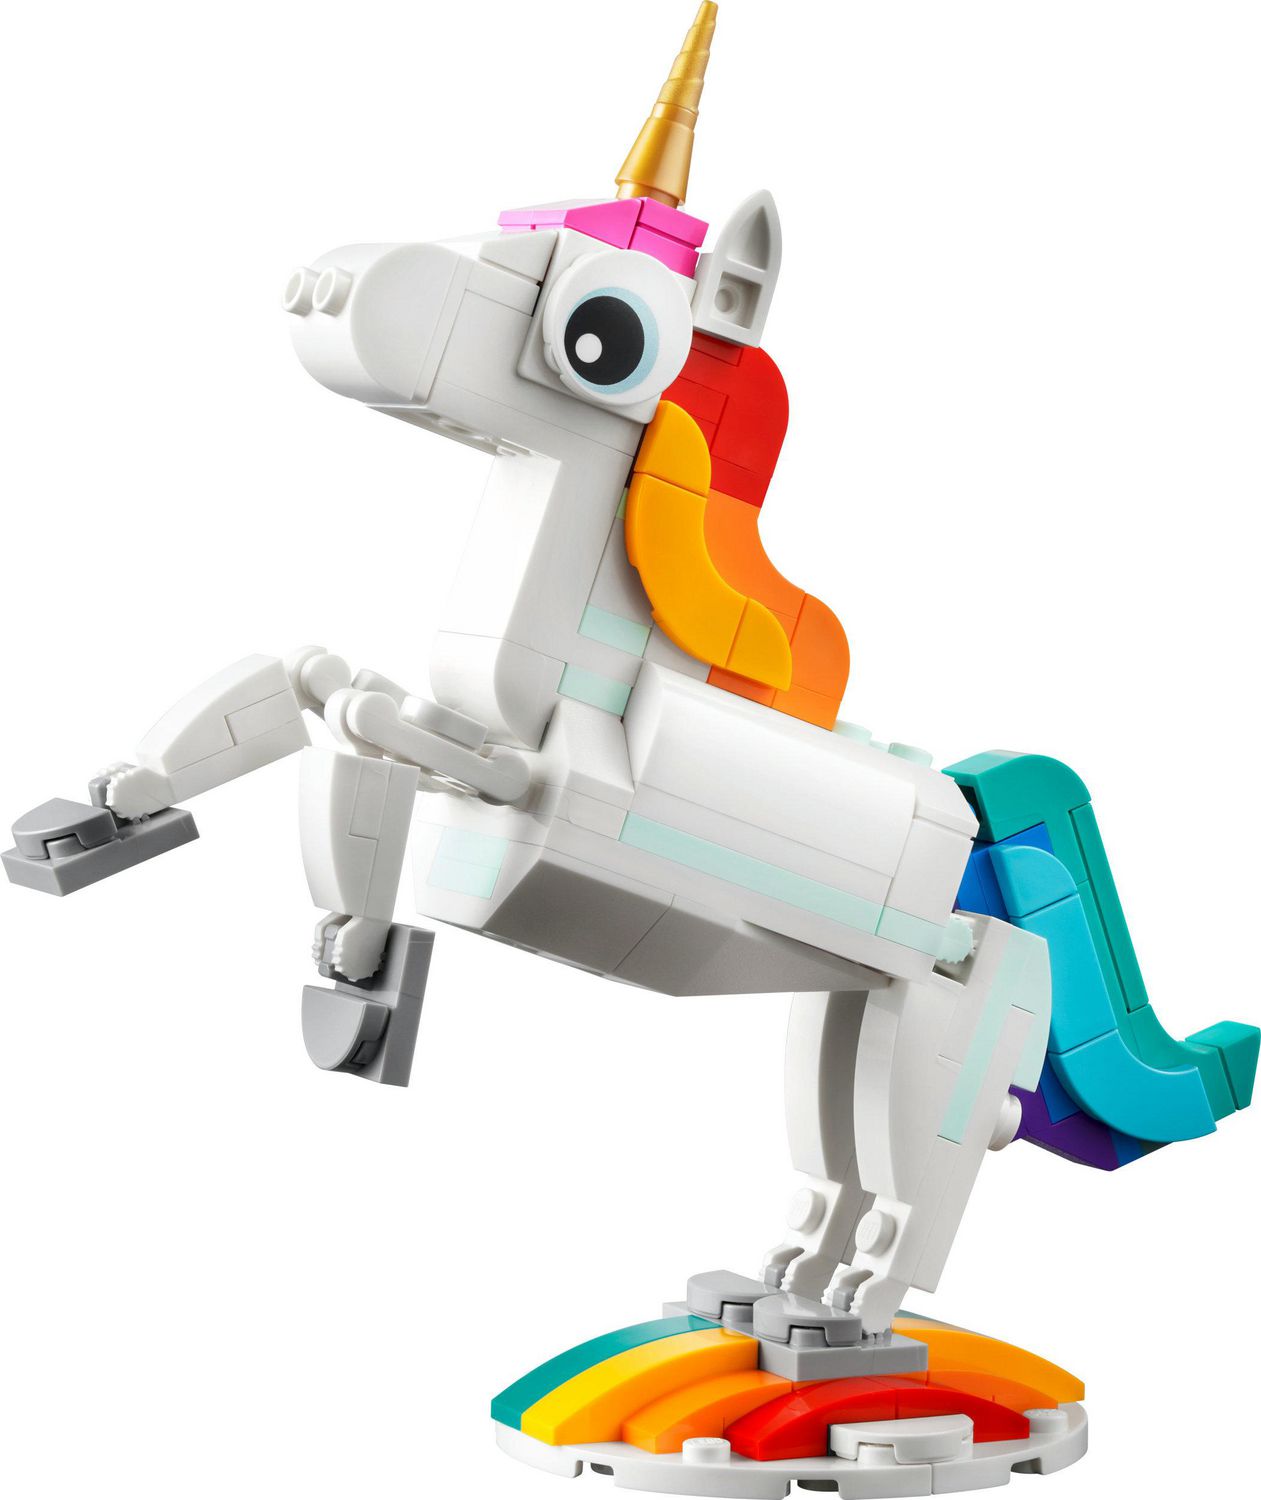 unicorn+stuff+for+8+year+old - Cheap Online Shopping -